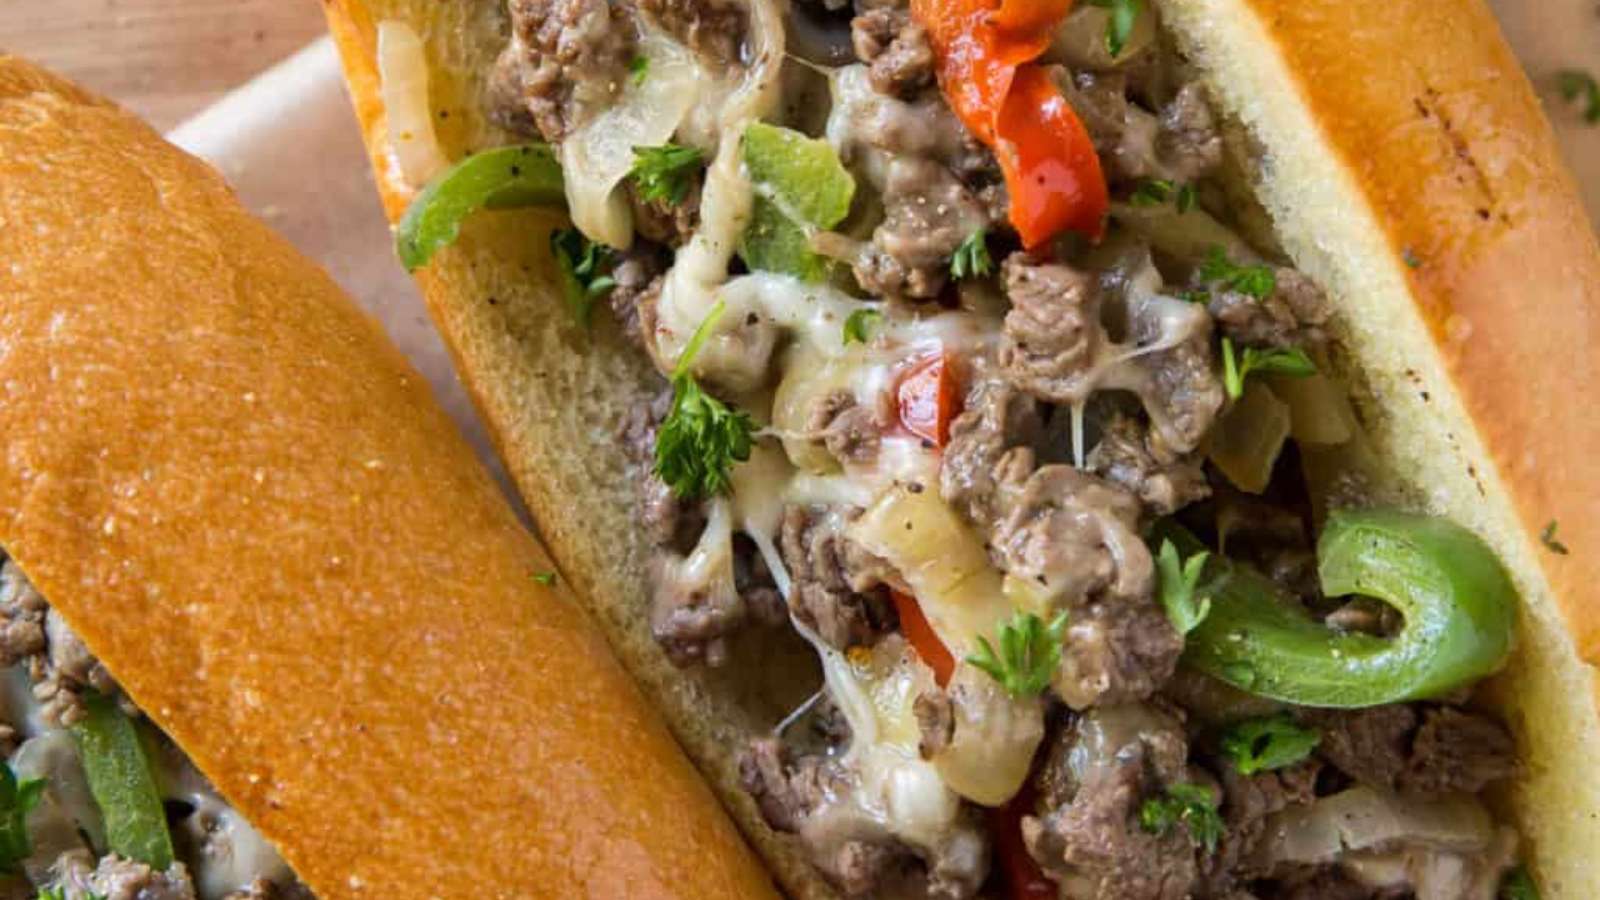 A philly cheesesteak sandwich with peppers and cheese.